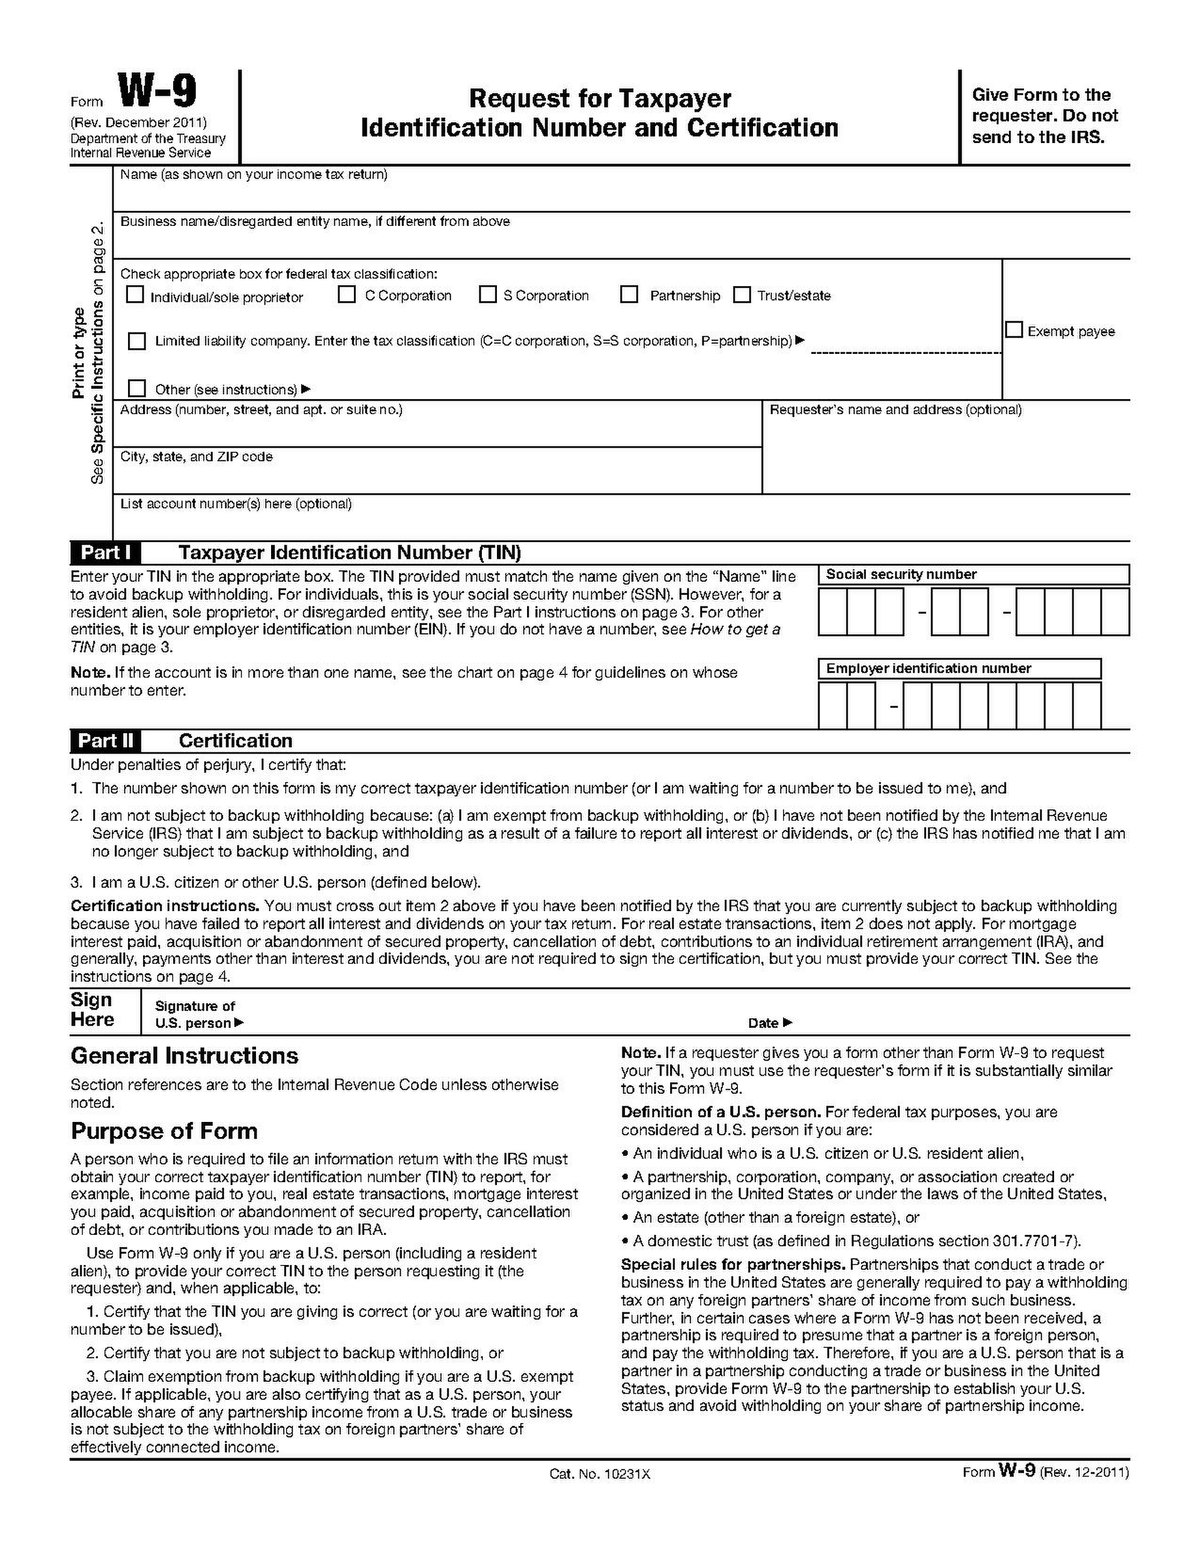 Tax forms and documents.